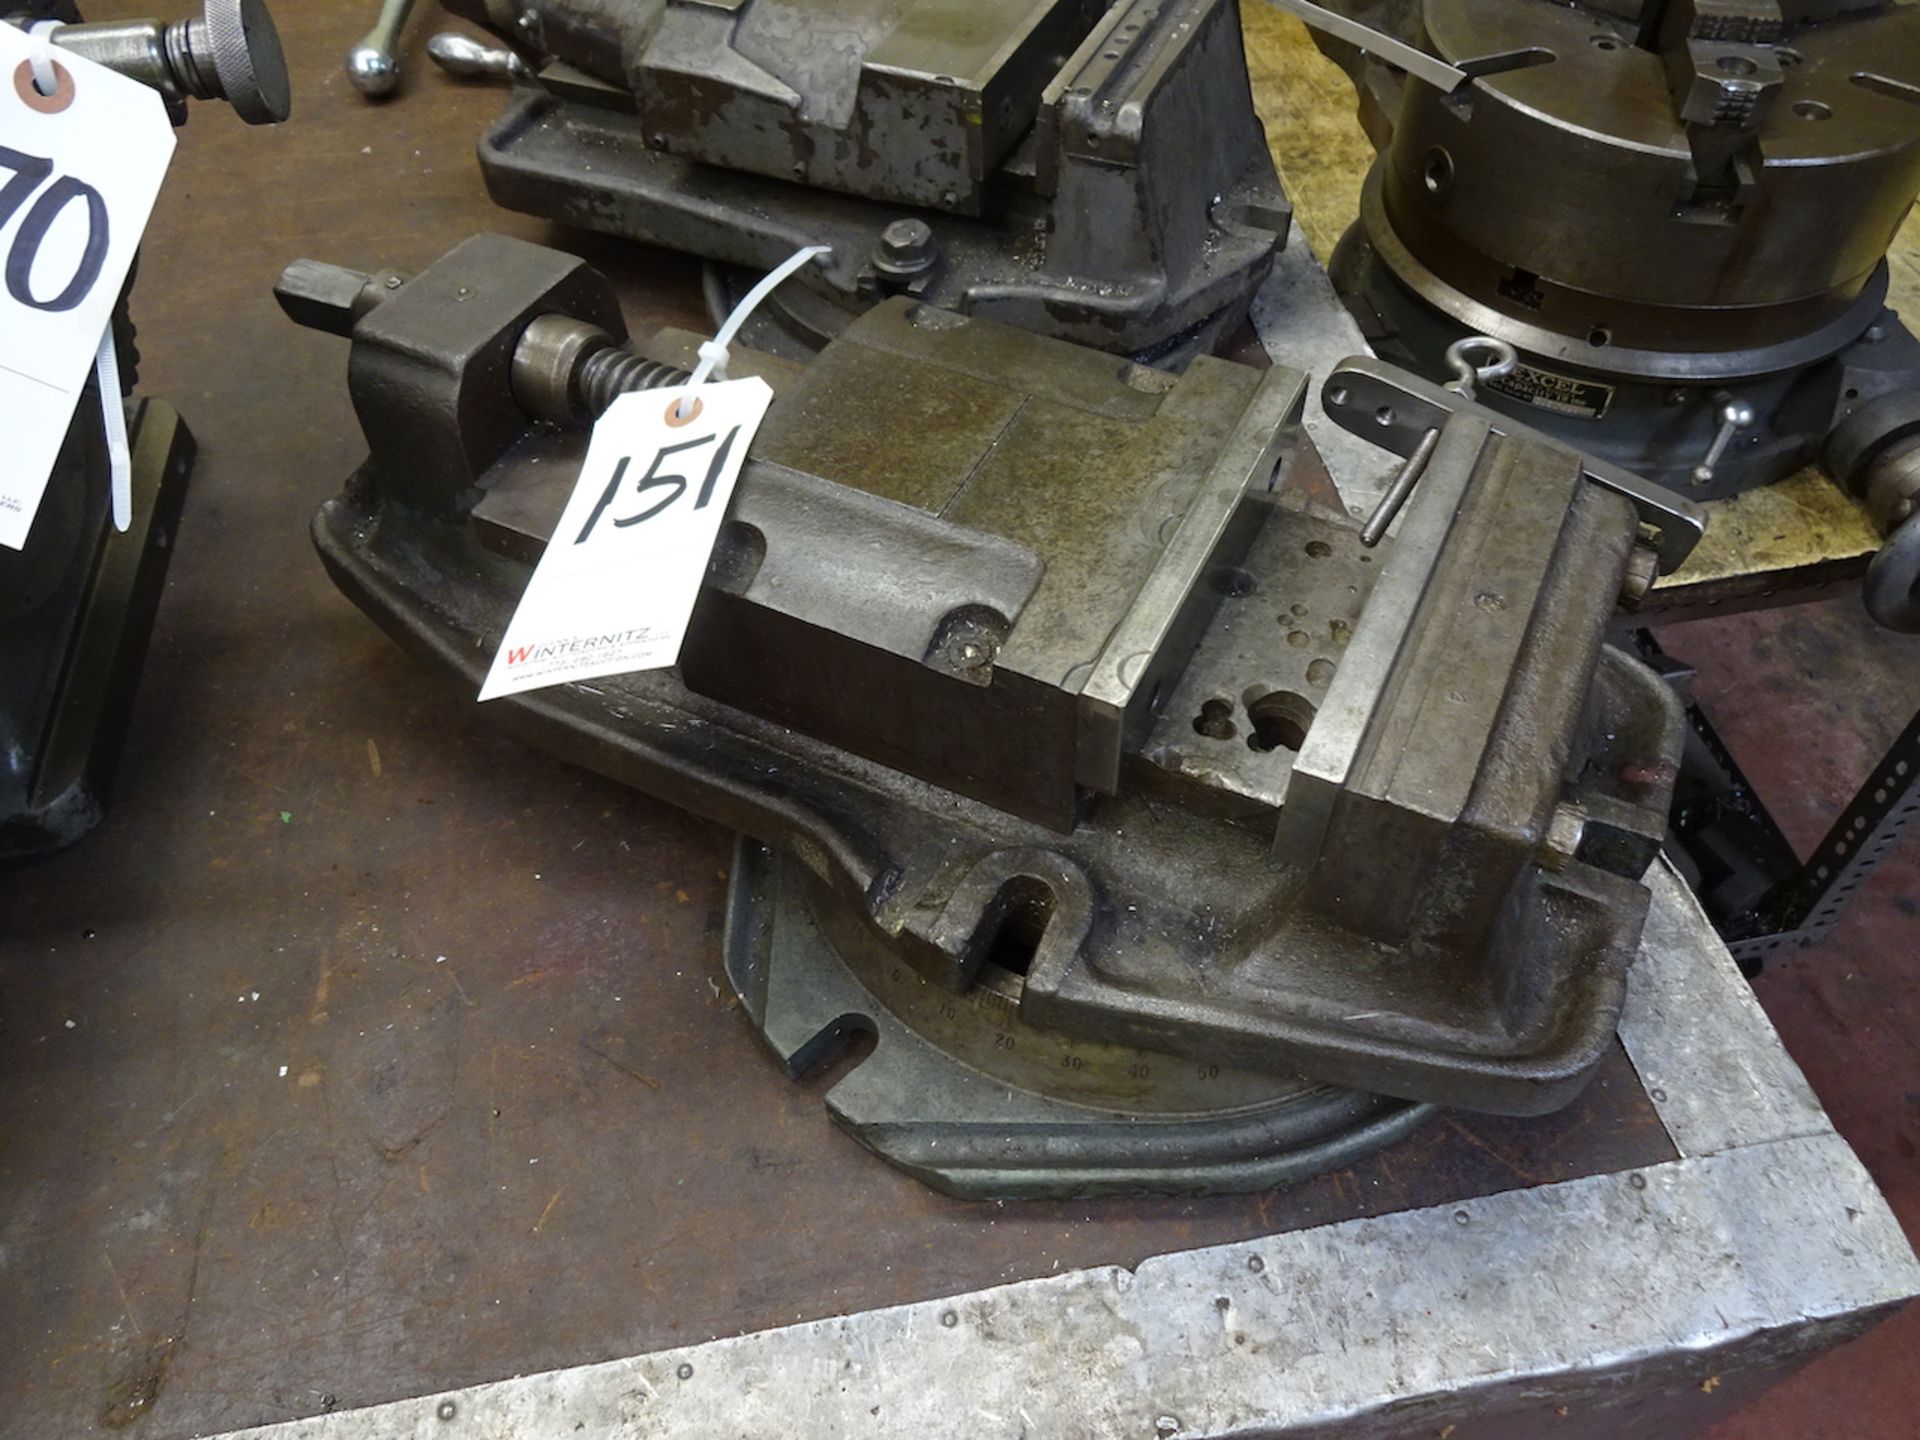 6 in. Machine Vise, with Swivel Base